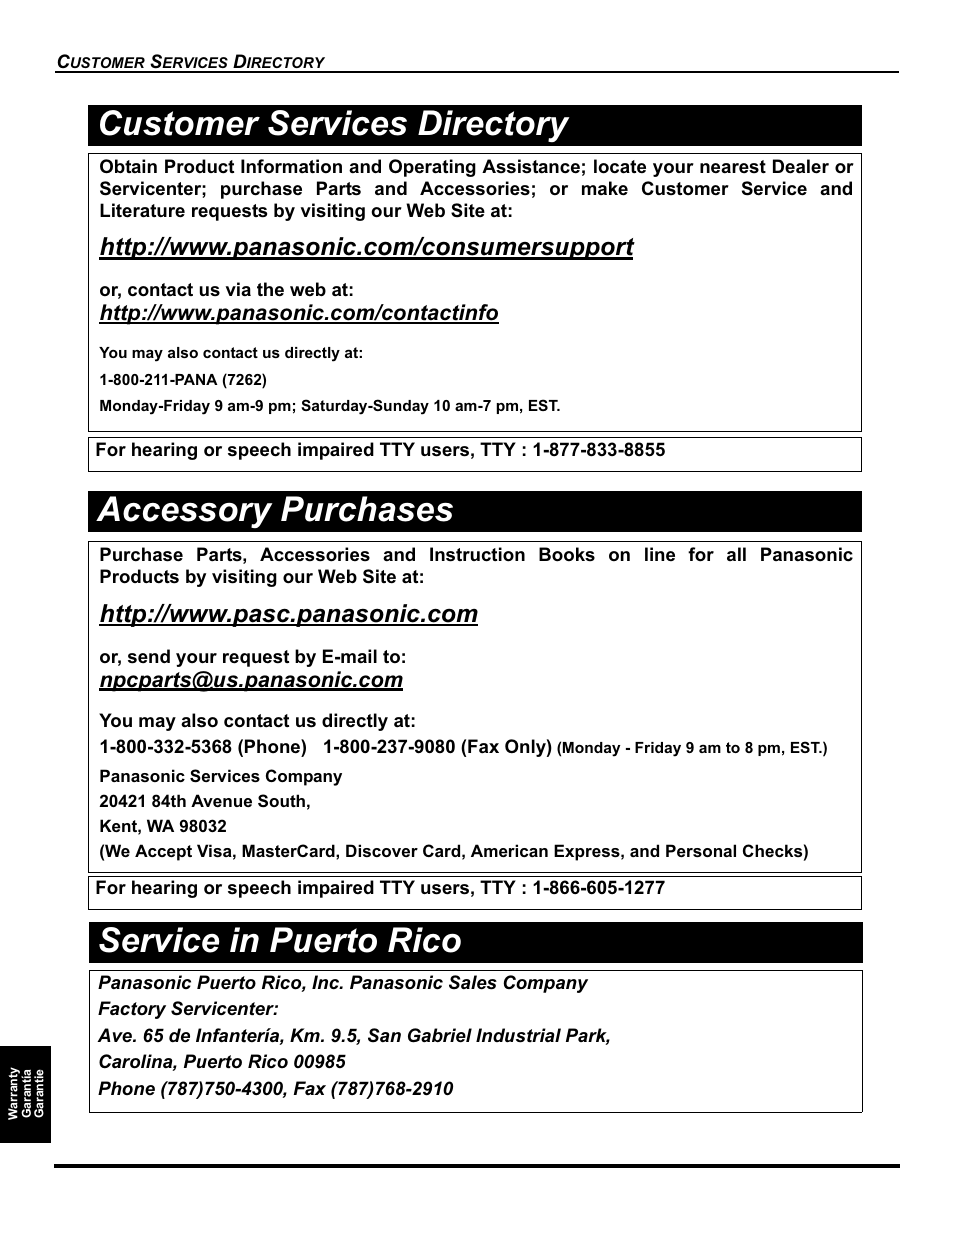 Service in puerto rico, Accessory purchases, Customer services directory | Panasonic CT-32HC15 Manuel d'utilisation | Page 52 / 56